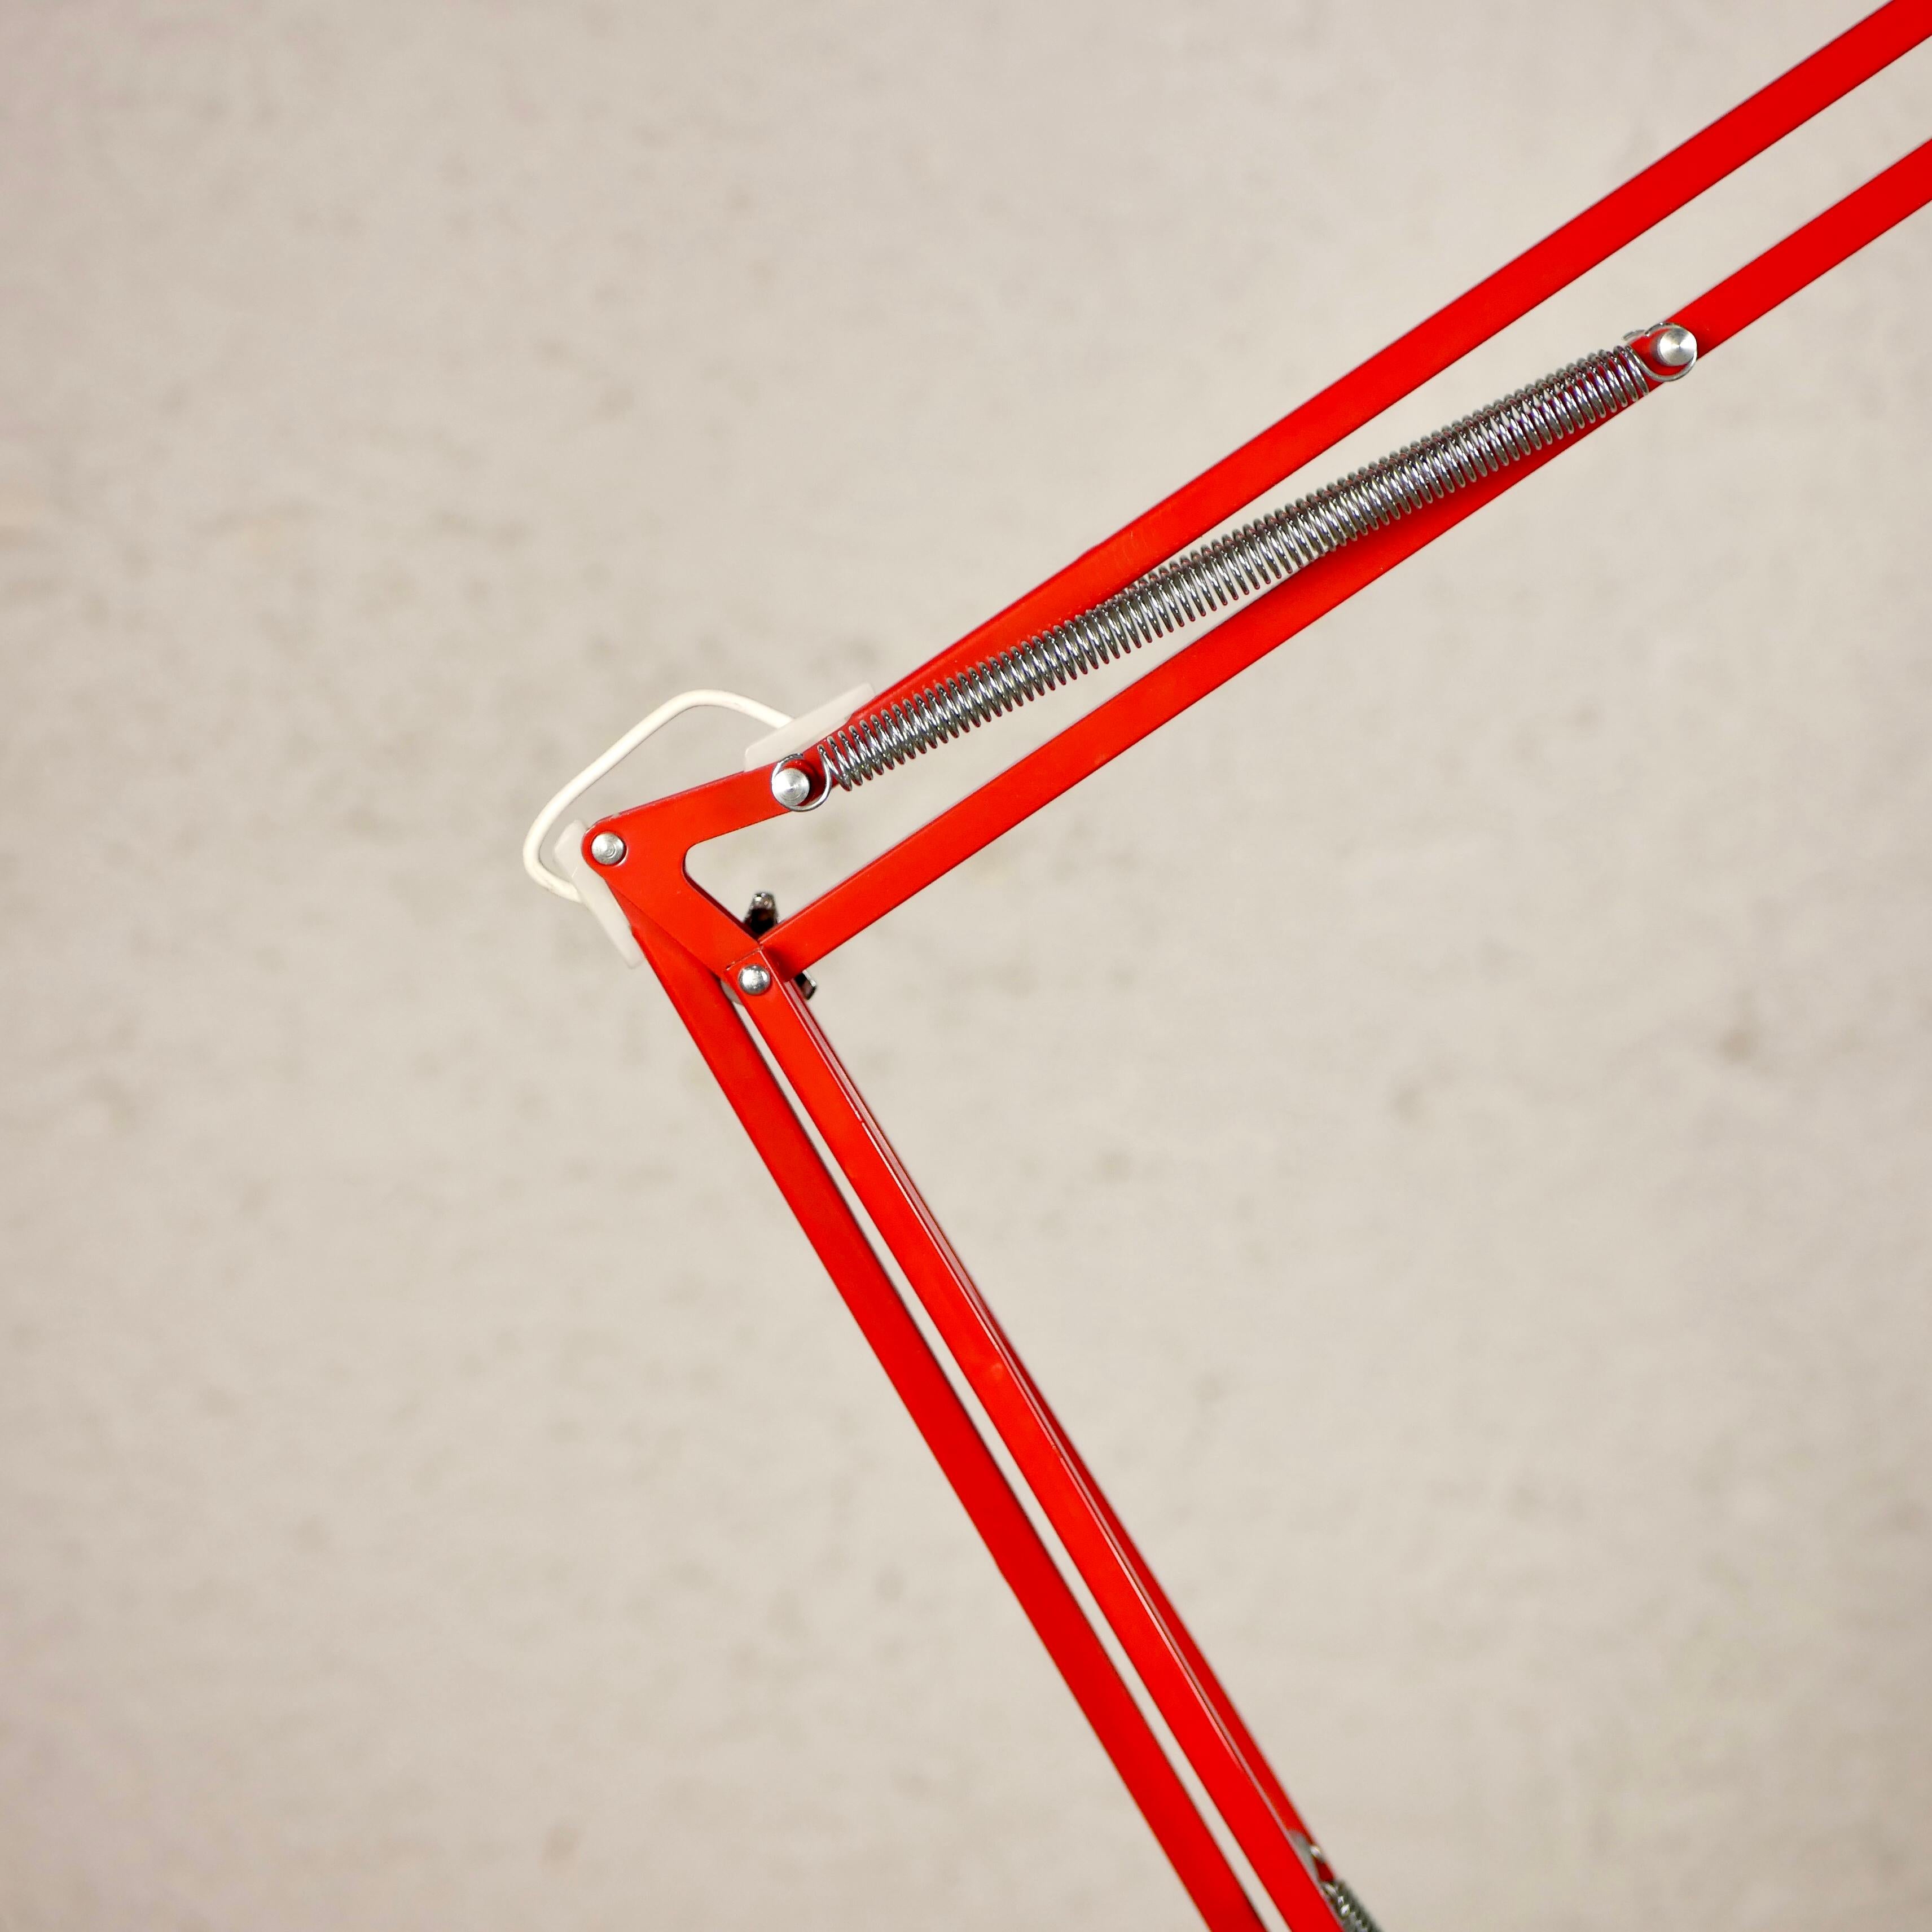 French Red Articulated Desk Lamp by Ledu, Made in, France